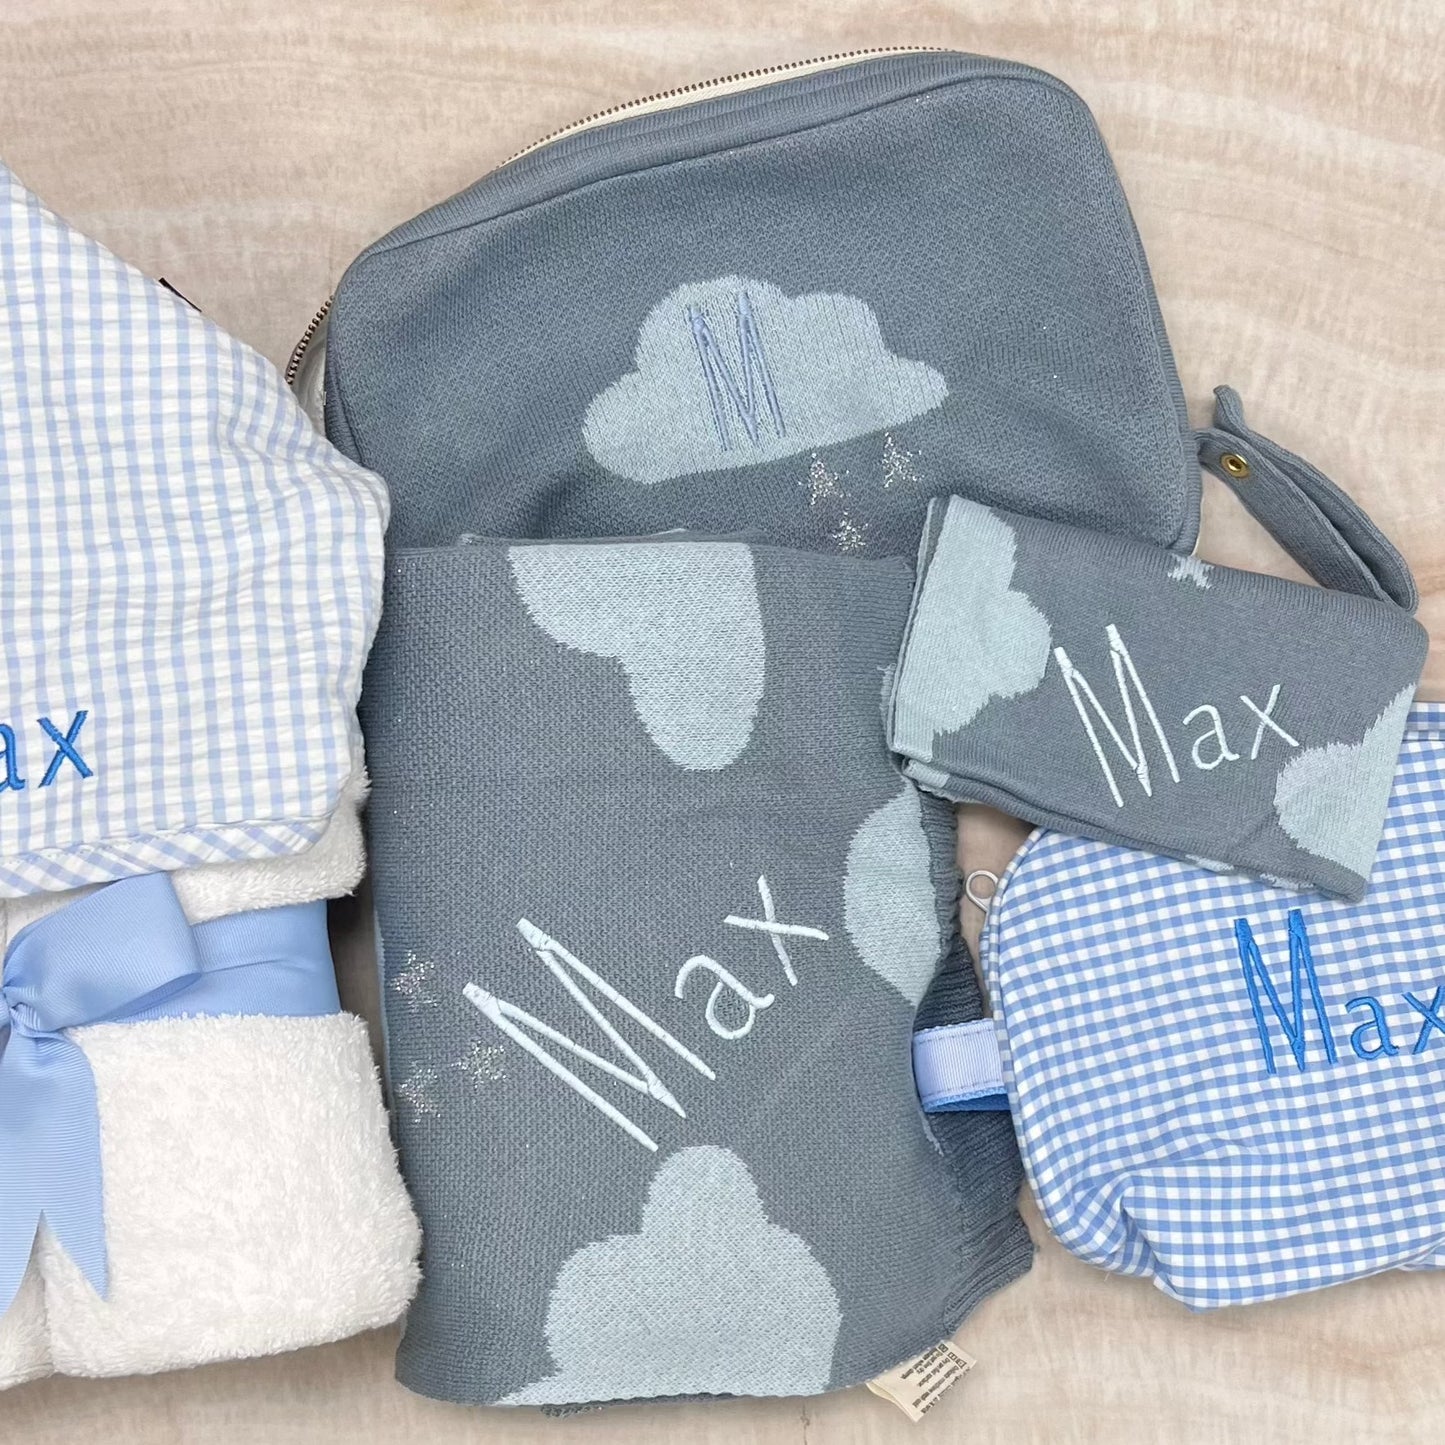 Personalized Baby Travel Set Blue Dreamy Clouds 3 Piece Knitted - Give Wink